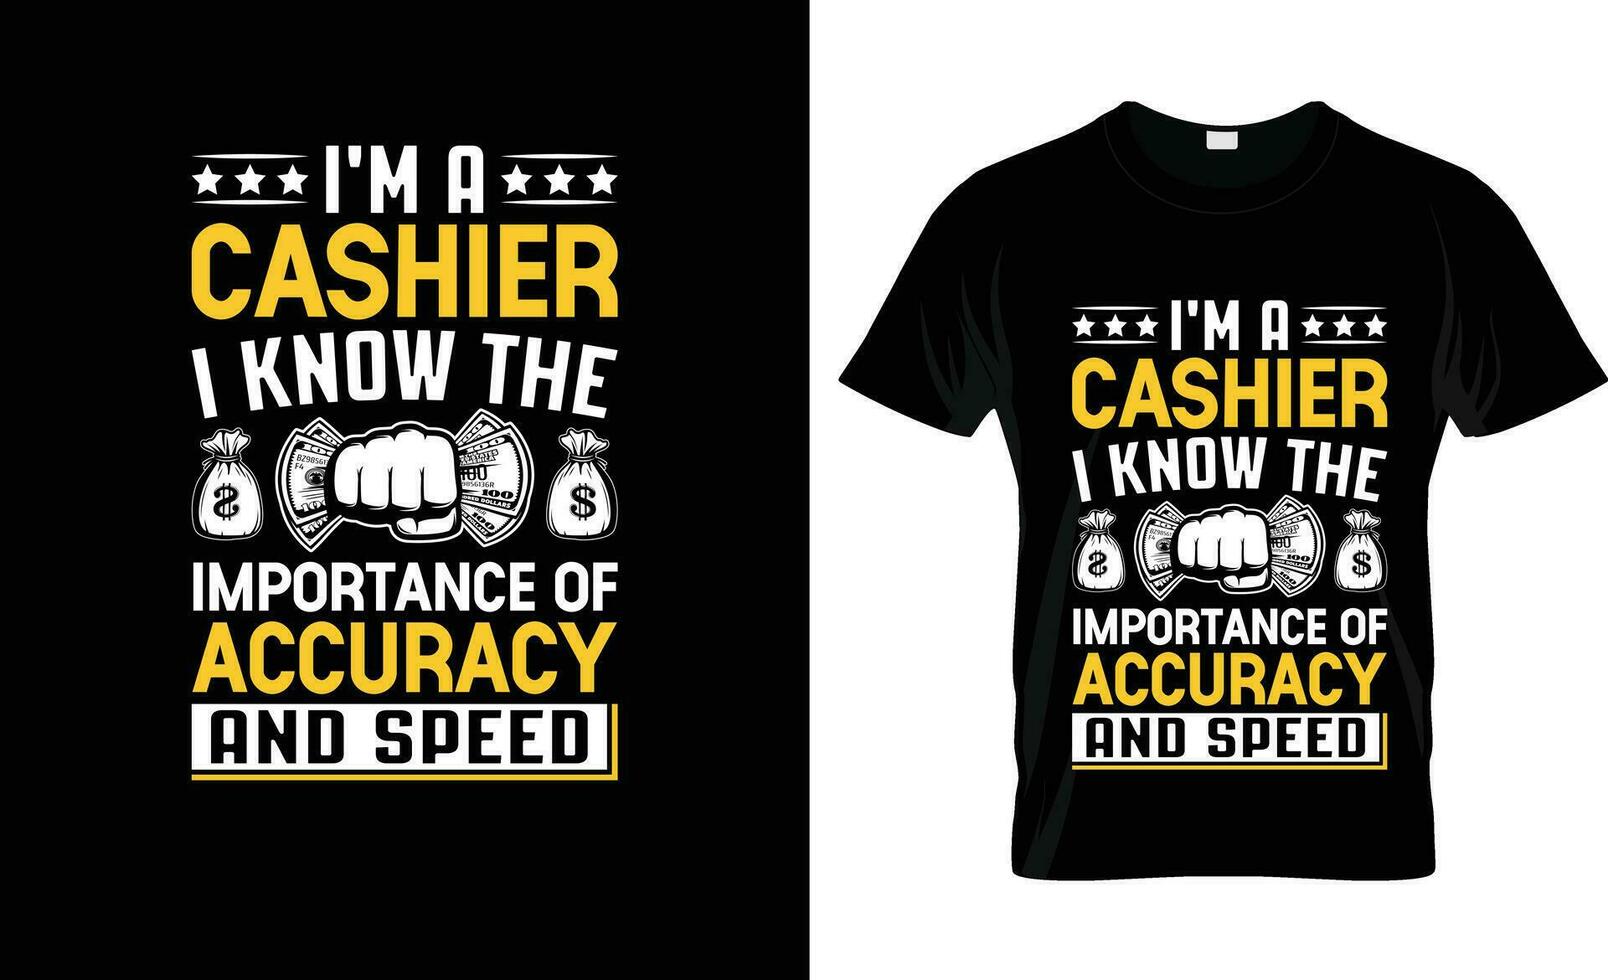 I'm a cashier i know the importance of colorful Graphic T-Shirt,  t-shirt print mockup vector